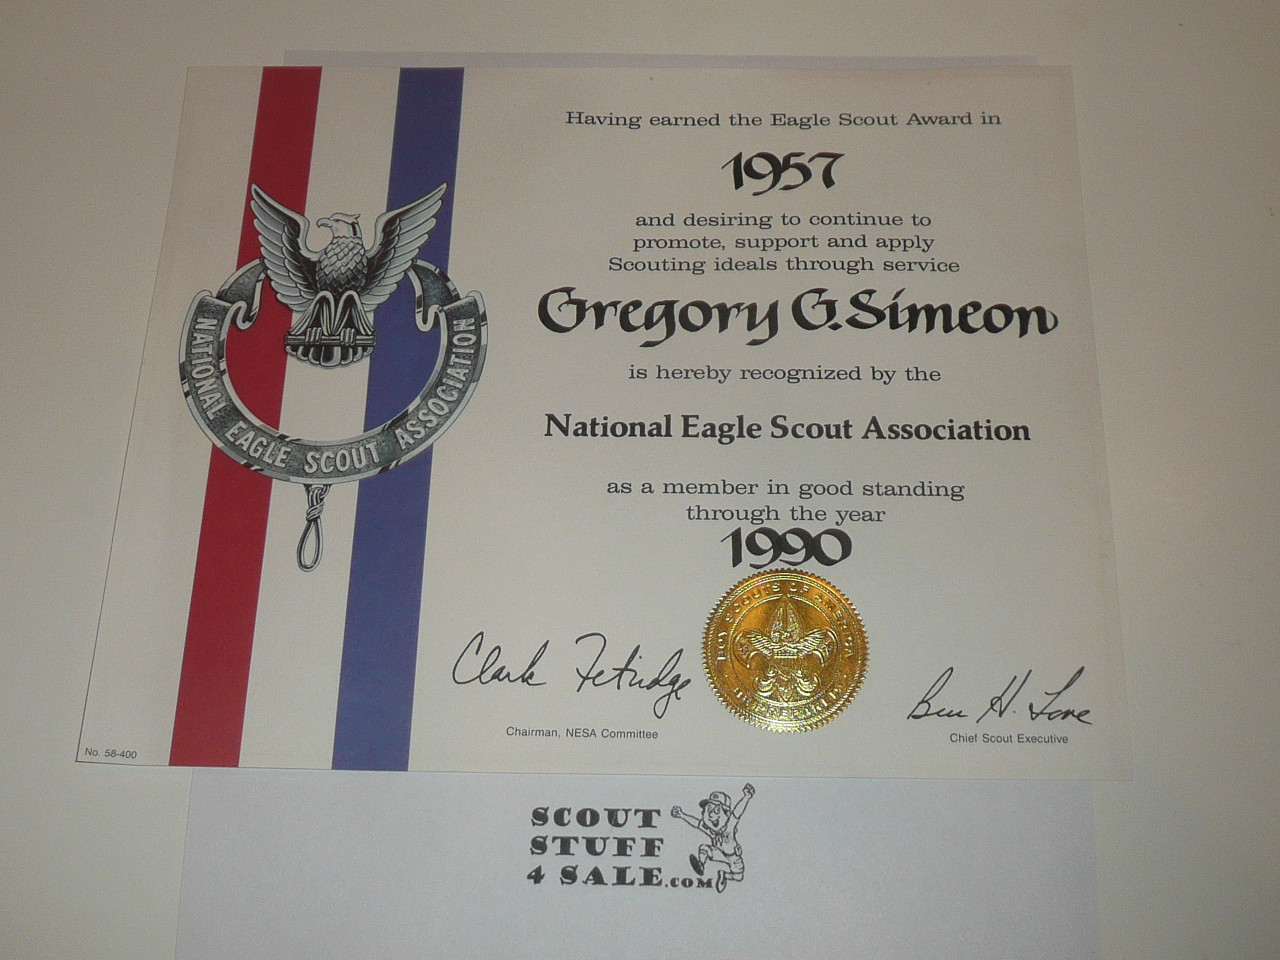 1970's National Eagle Scout Association Member Certificate, presented